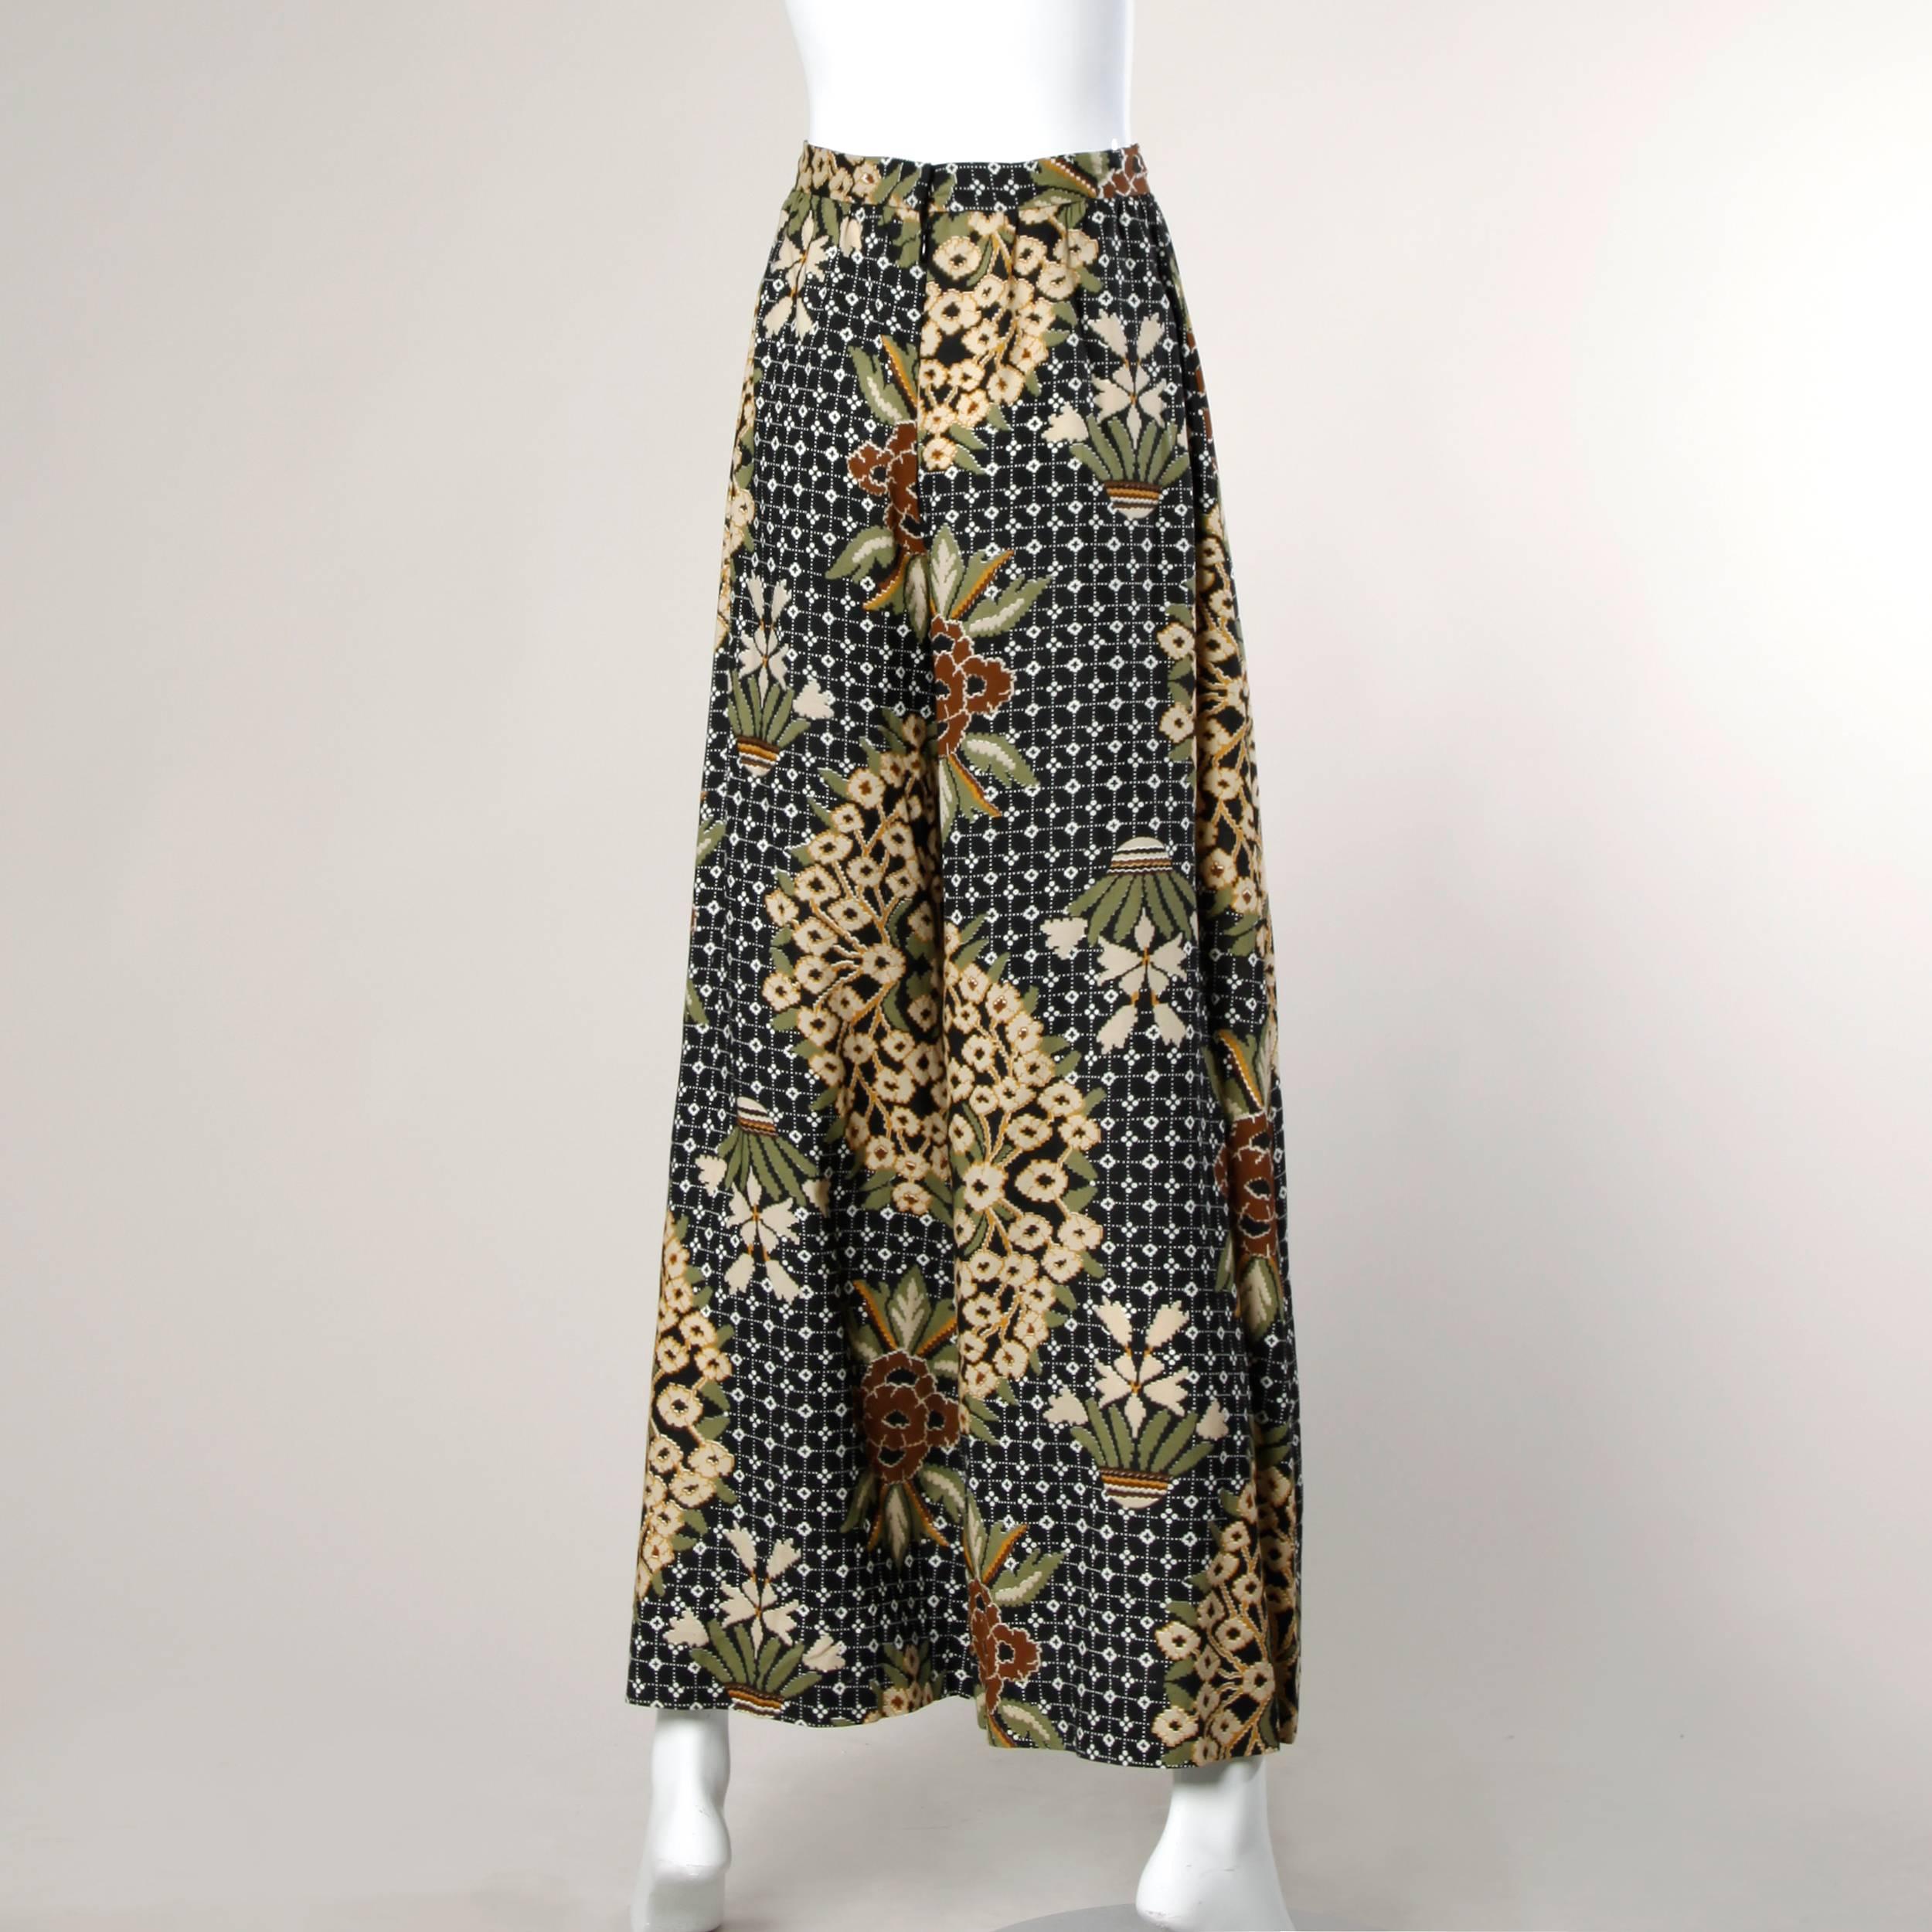 Rizkallah 1970s vintage wide leg palazzo pants with an earthy bohemian floral print. Very wearable!

Details:

Unlined
Closure: Back Zip and Hook Closure
Marked Size: Not Marked
Estimated Size: Small
Color: Multicolored Earthtones
Fabric: